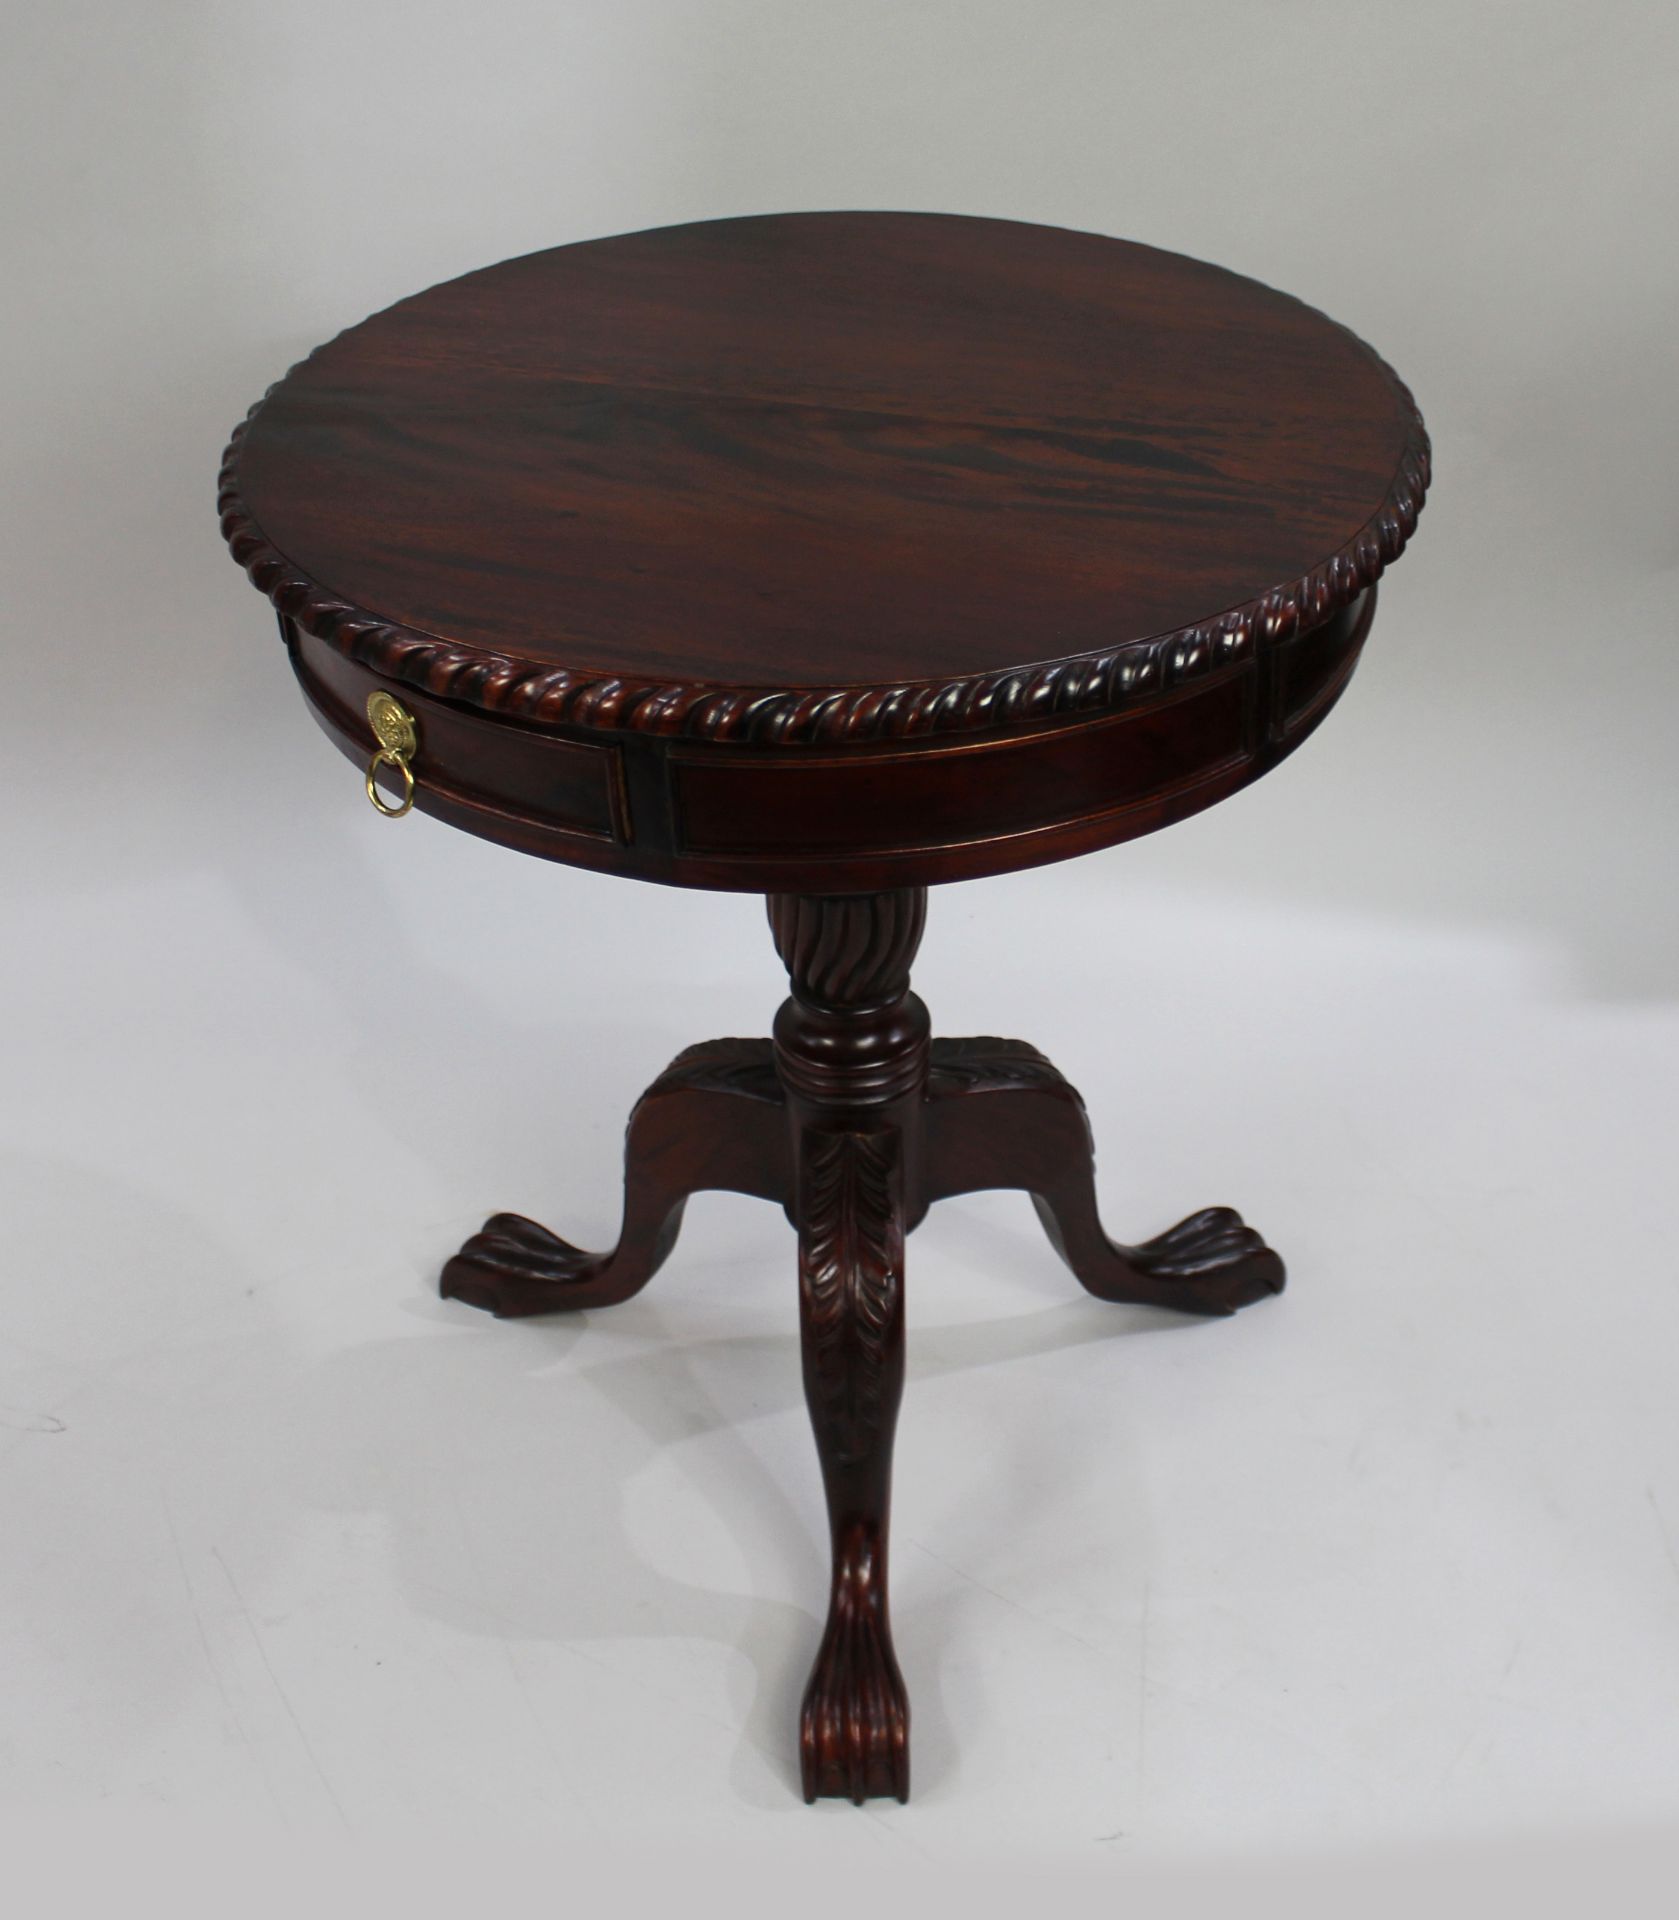 Carved Mahogany Drum Table - Image 6 of 6